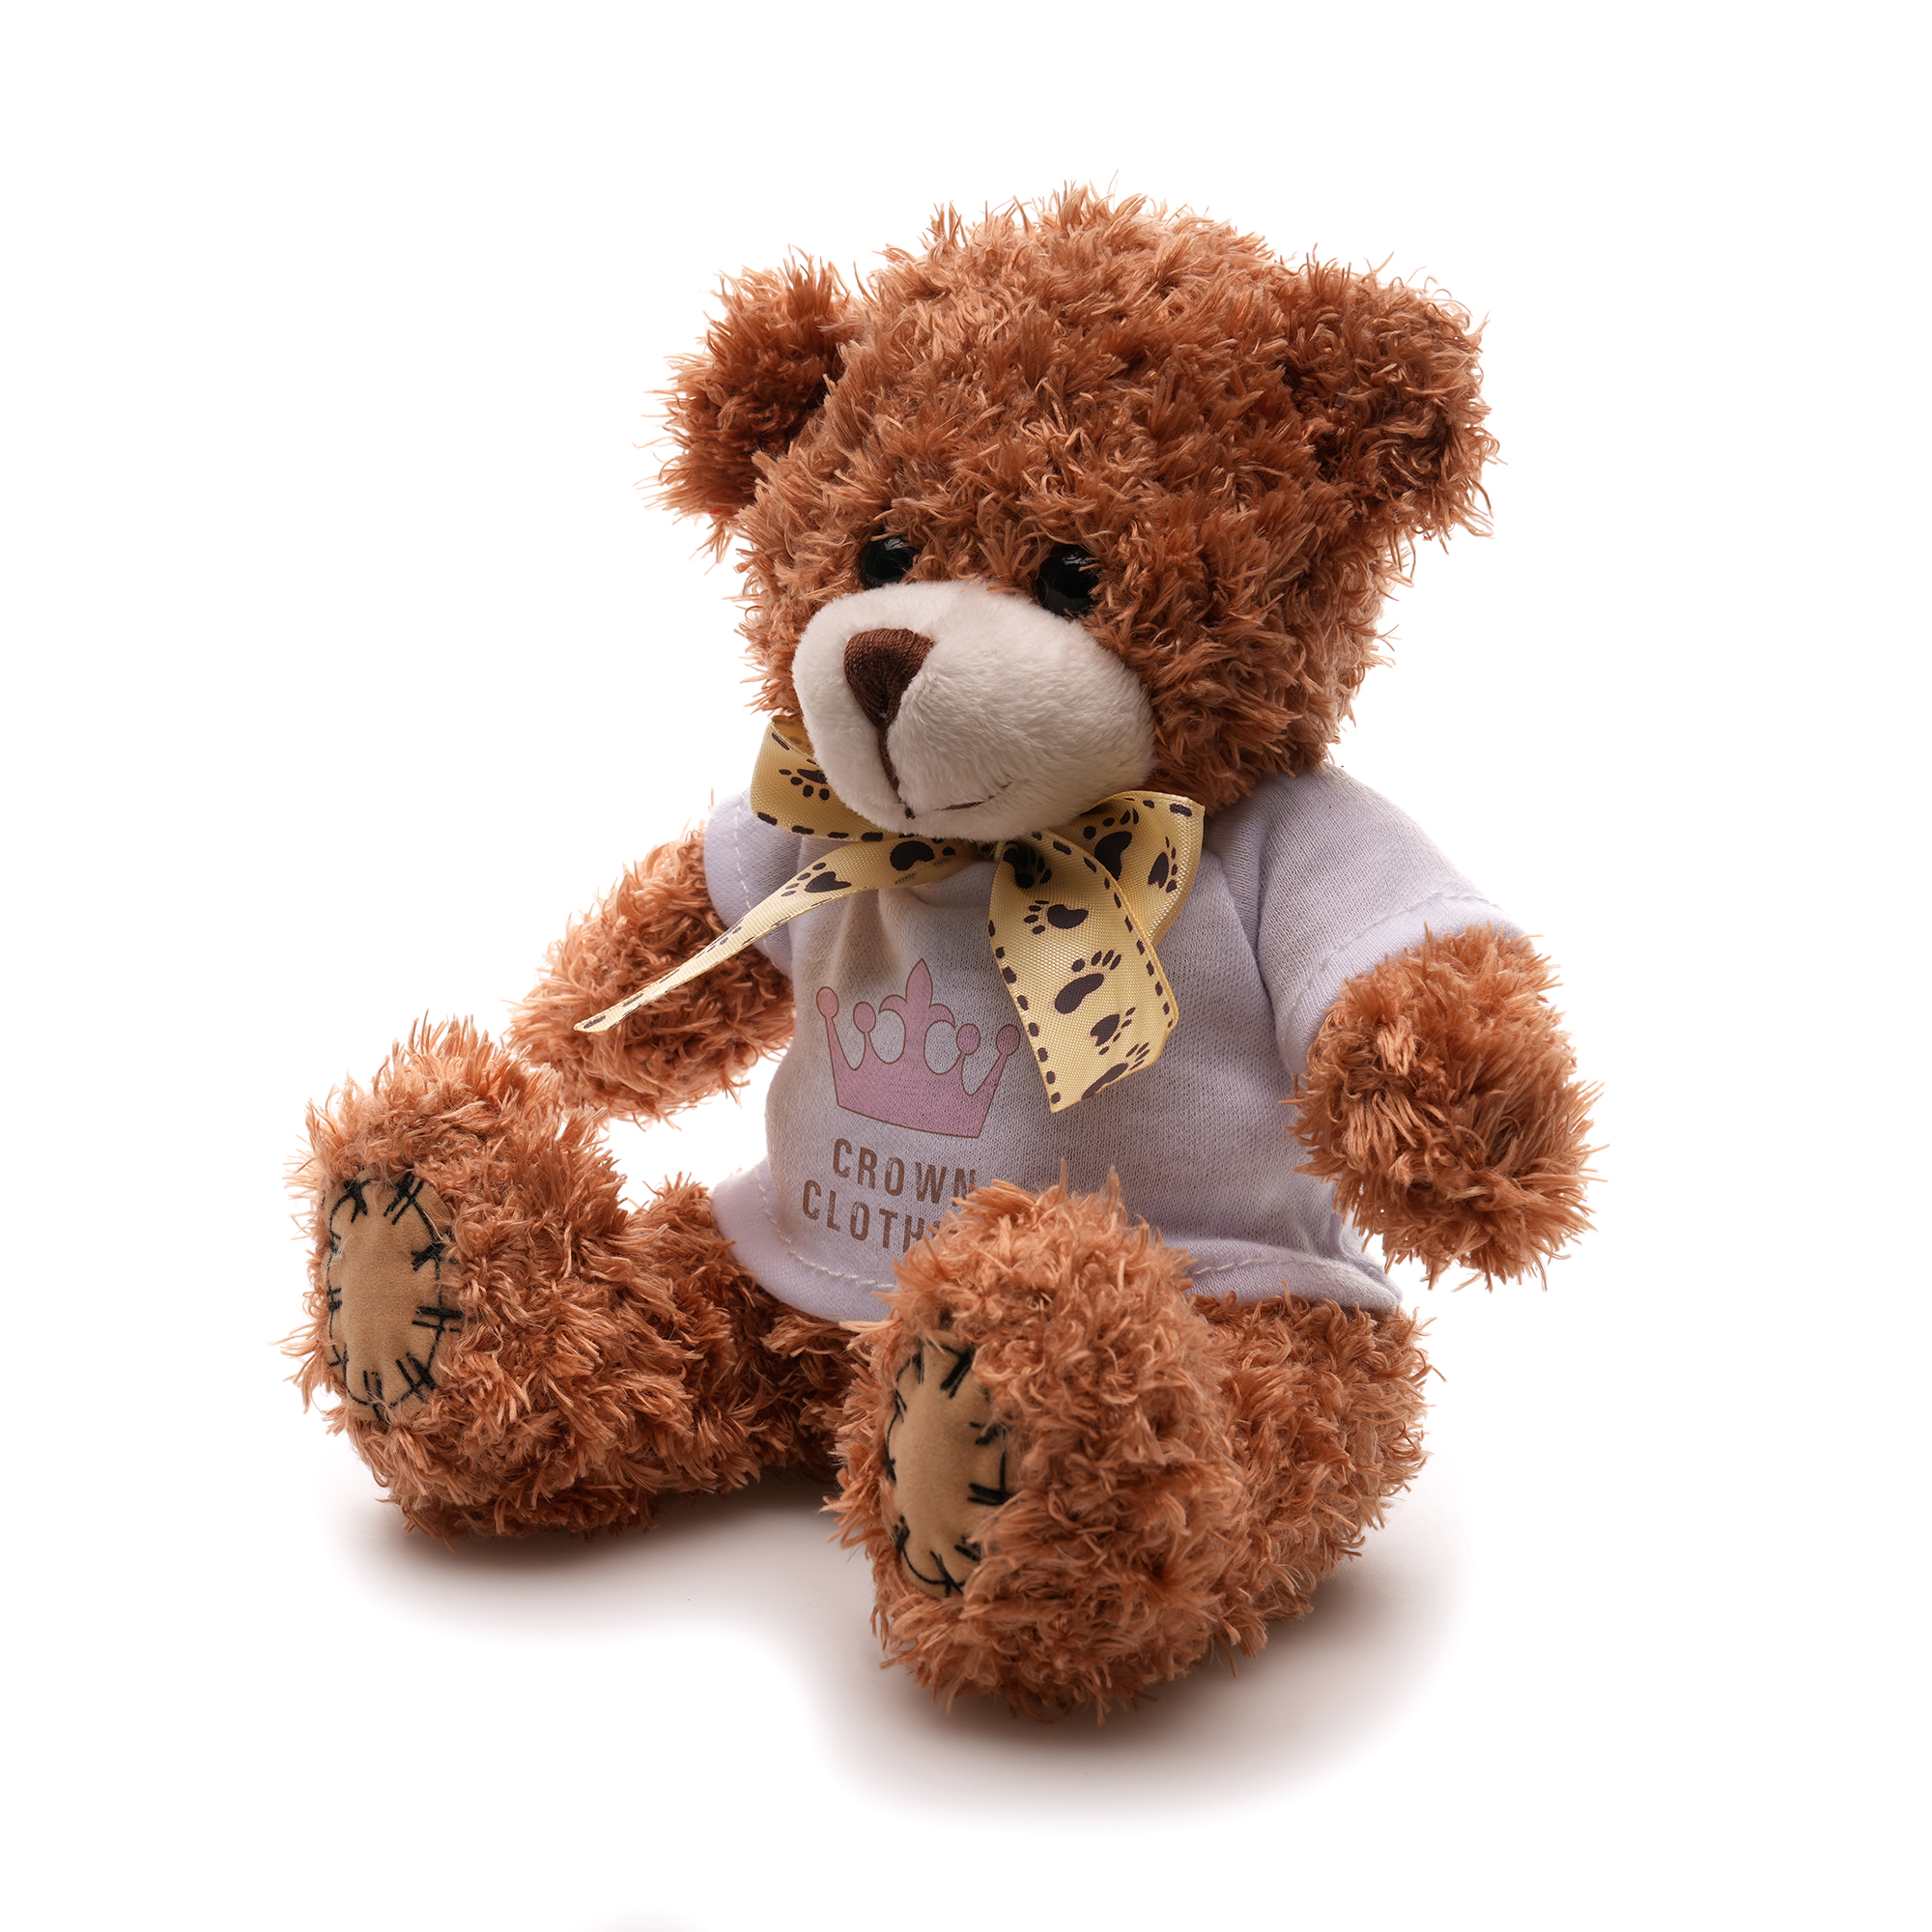 Crafted with polyester skin fabric and charming ribbon neck tie for added elegance, this 18cm teddy bear comes with cotton filler, embroidered thread nose and mouth and PP plastic eyes, adding a delightful tactile element with white t-shirt for branding.